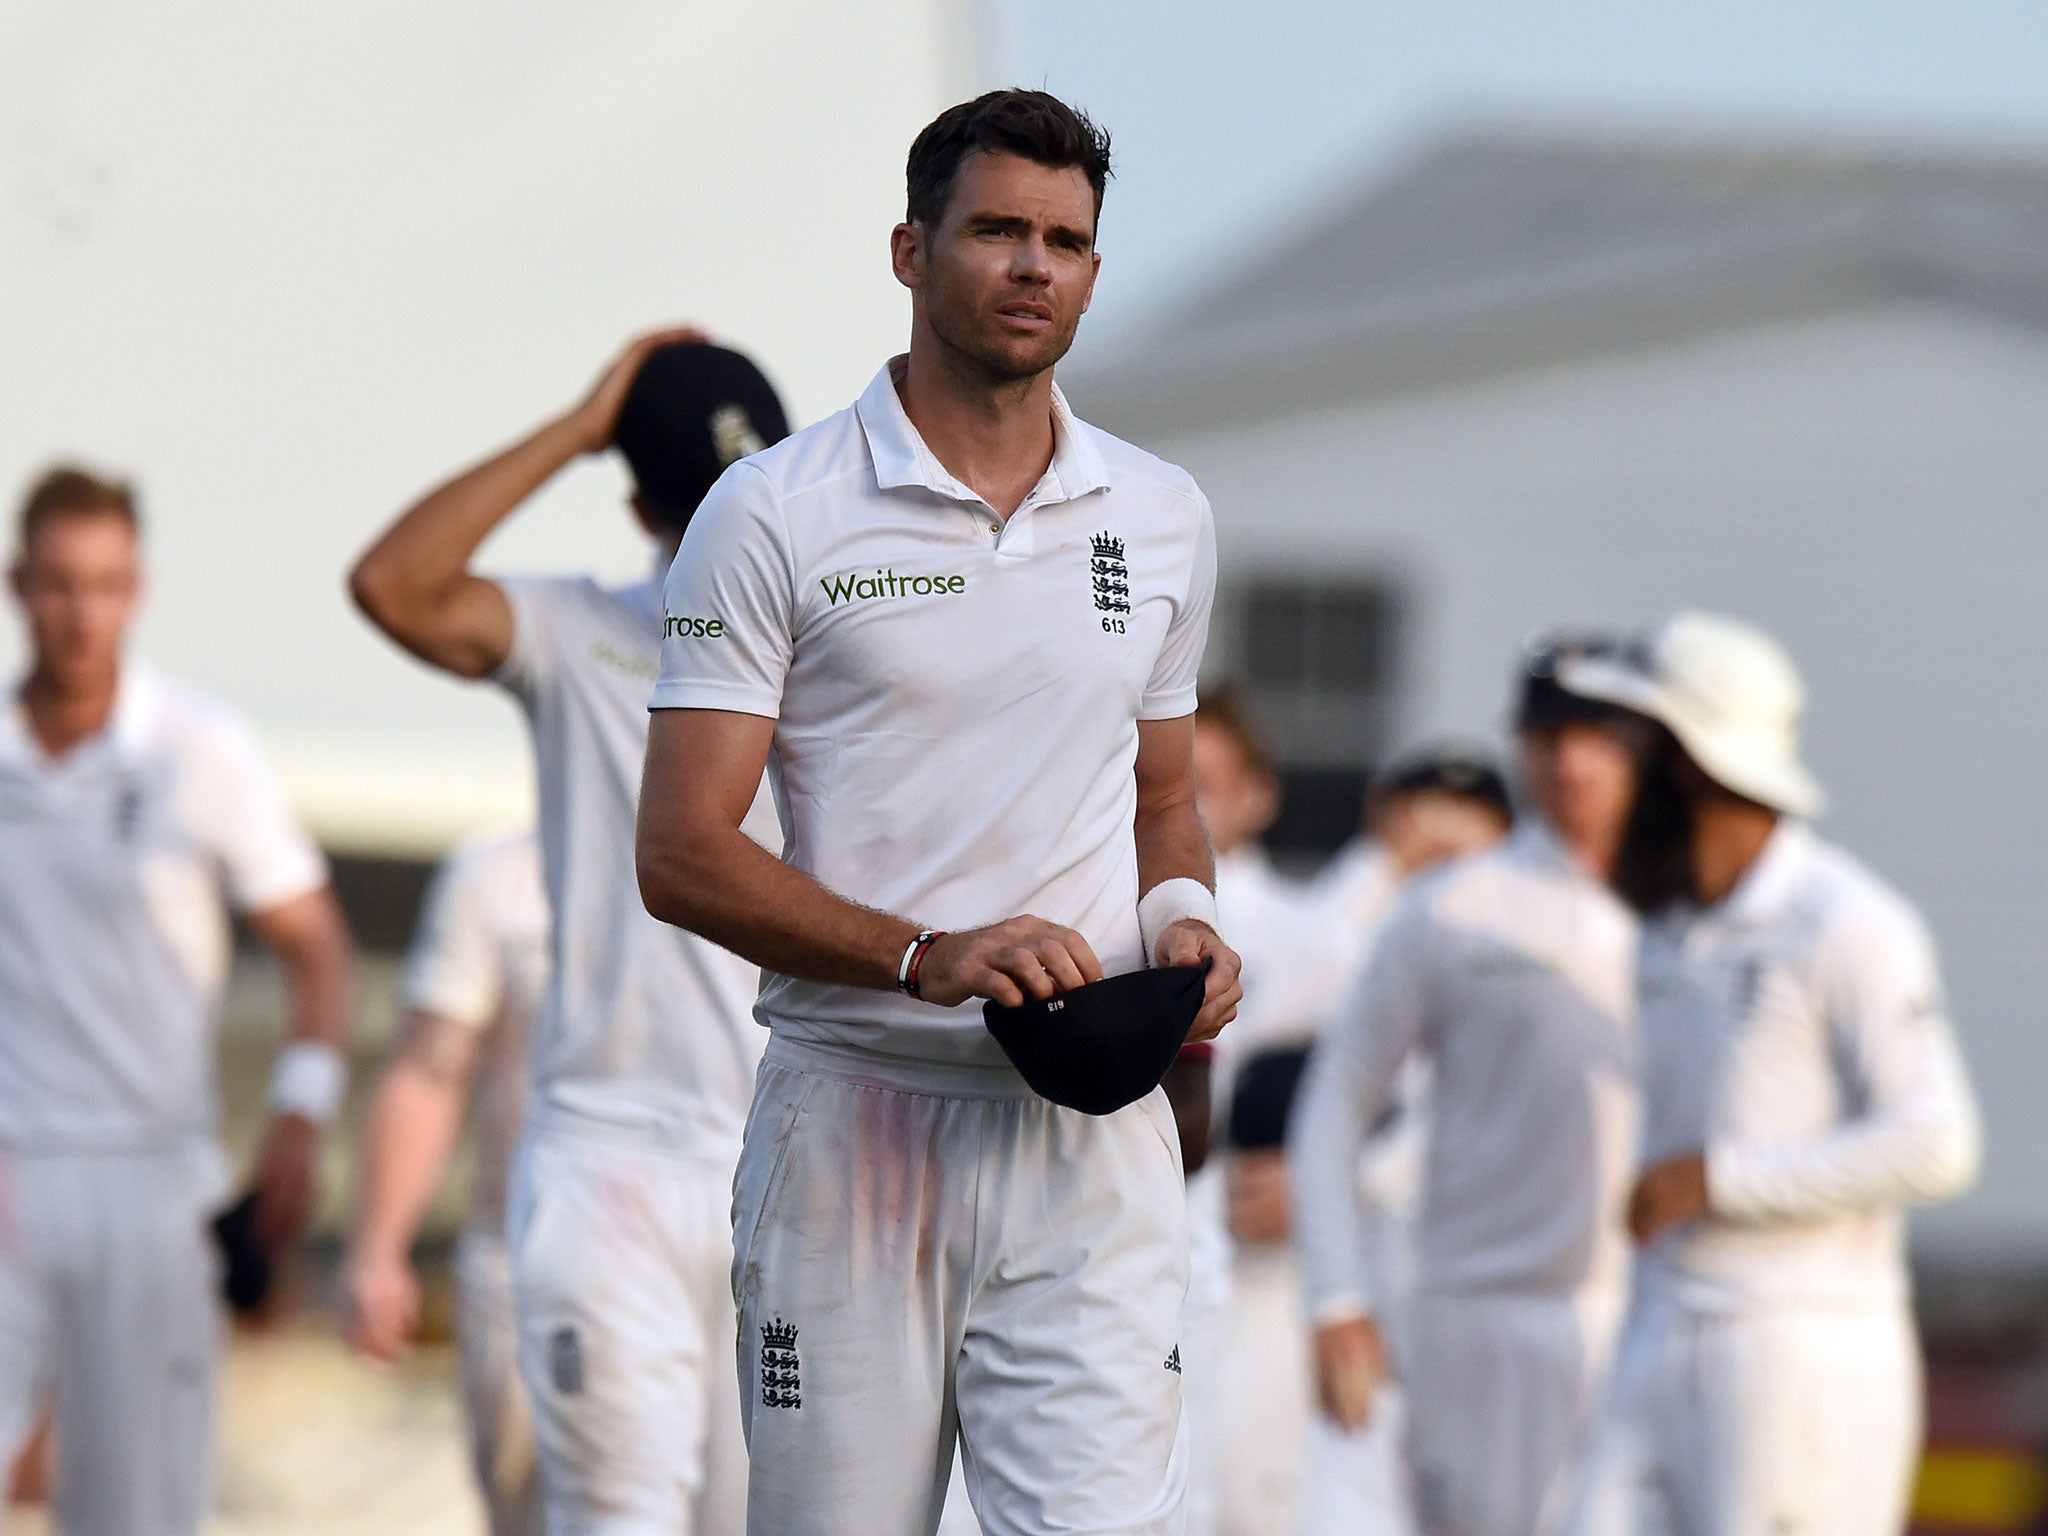 England's leading wicket-taker James Anderson